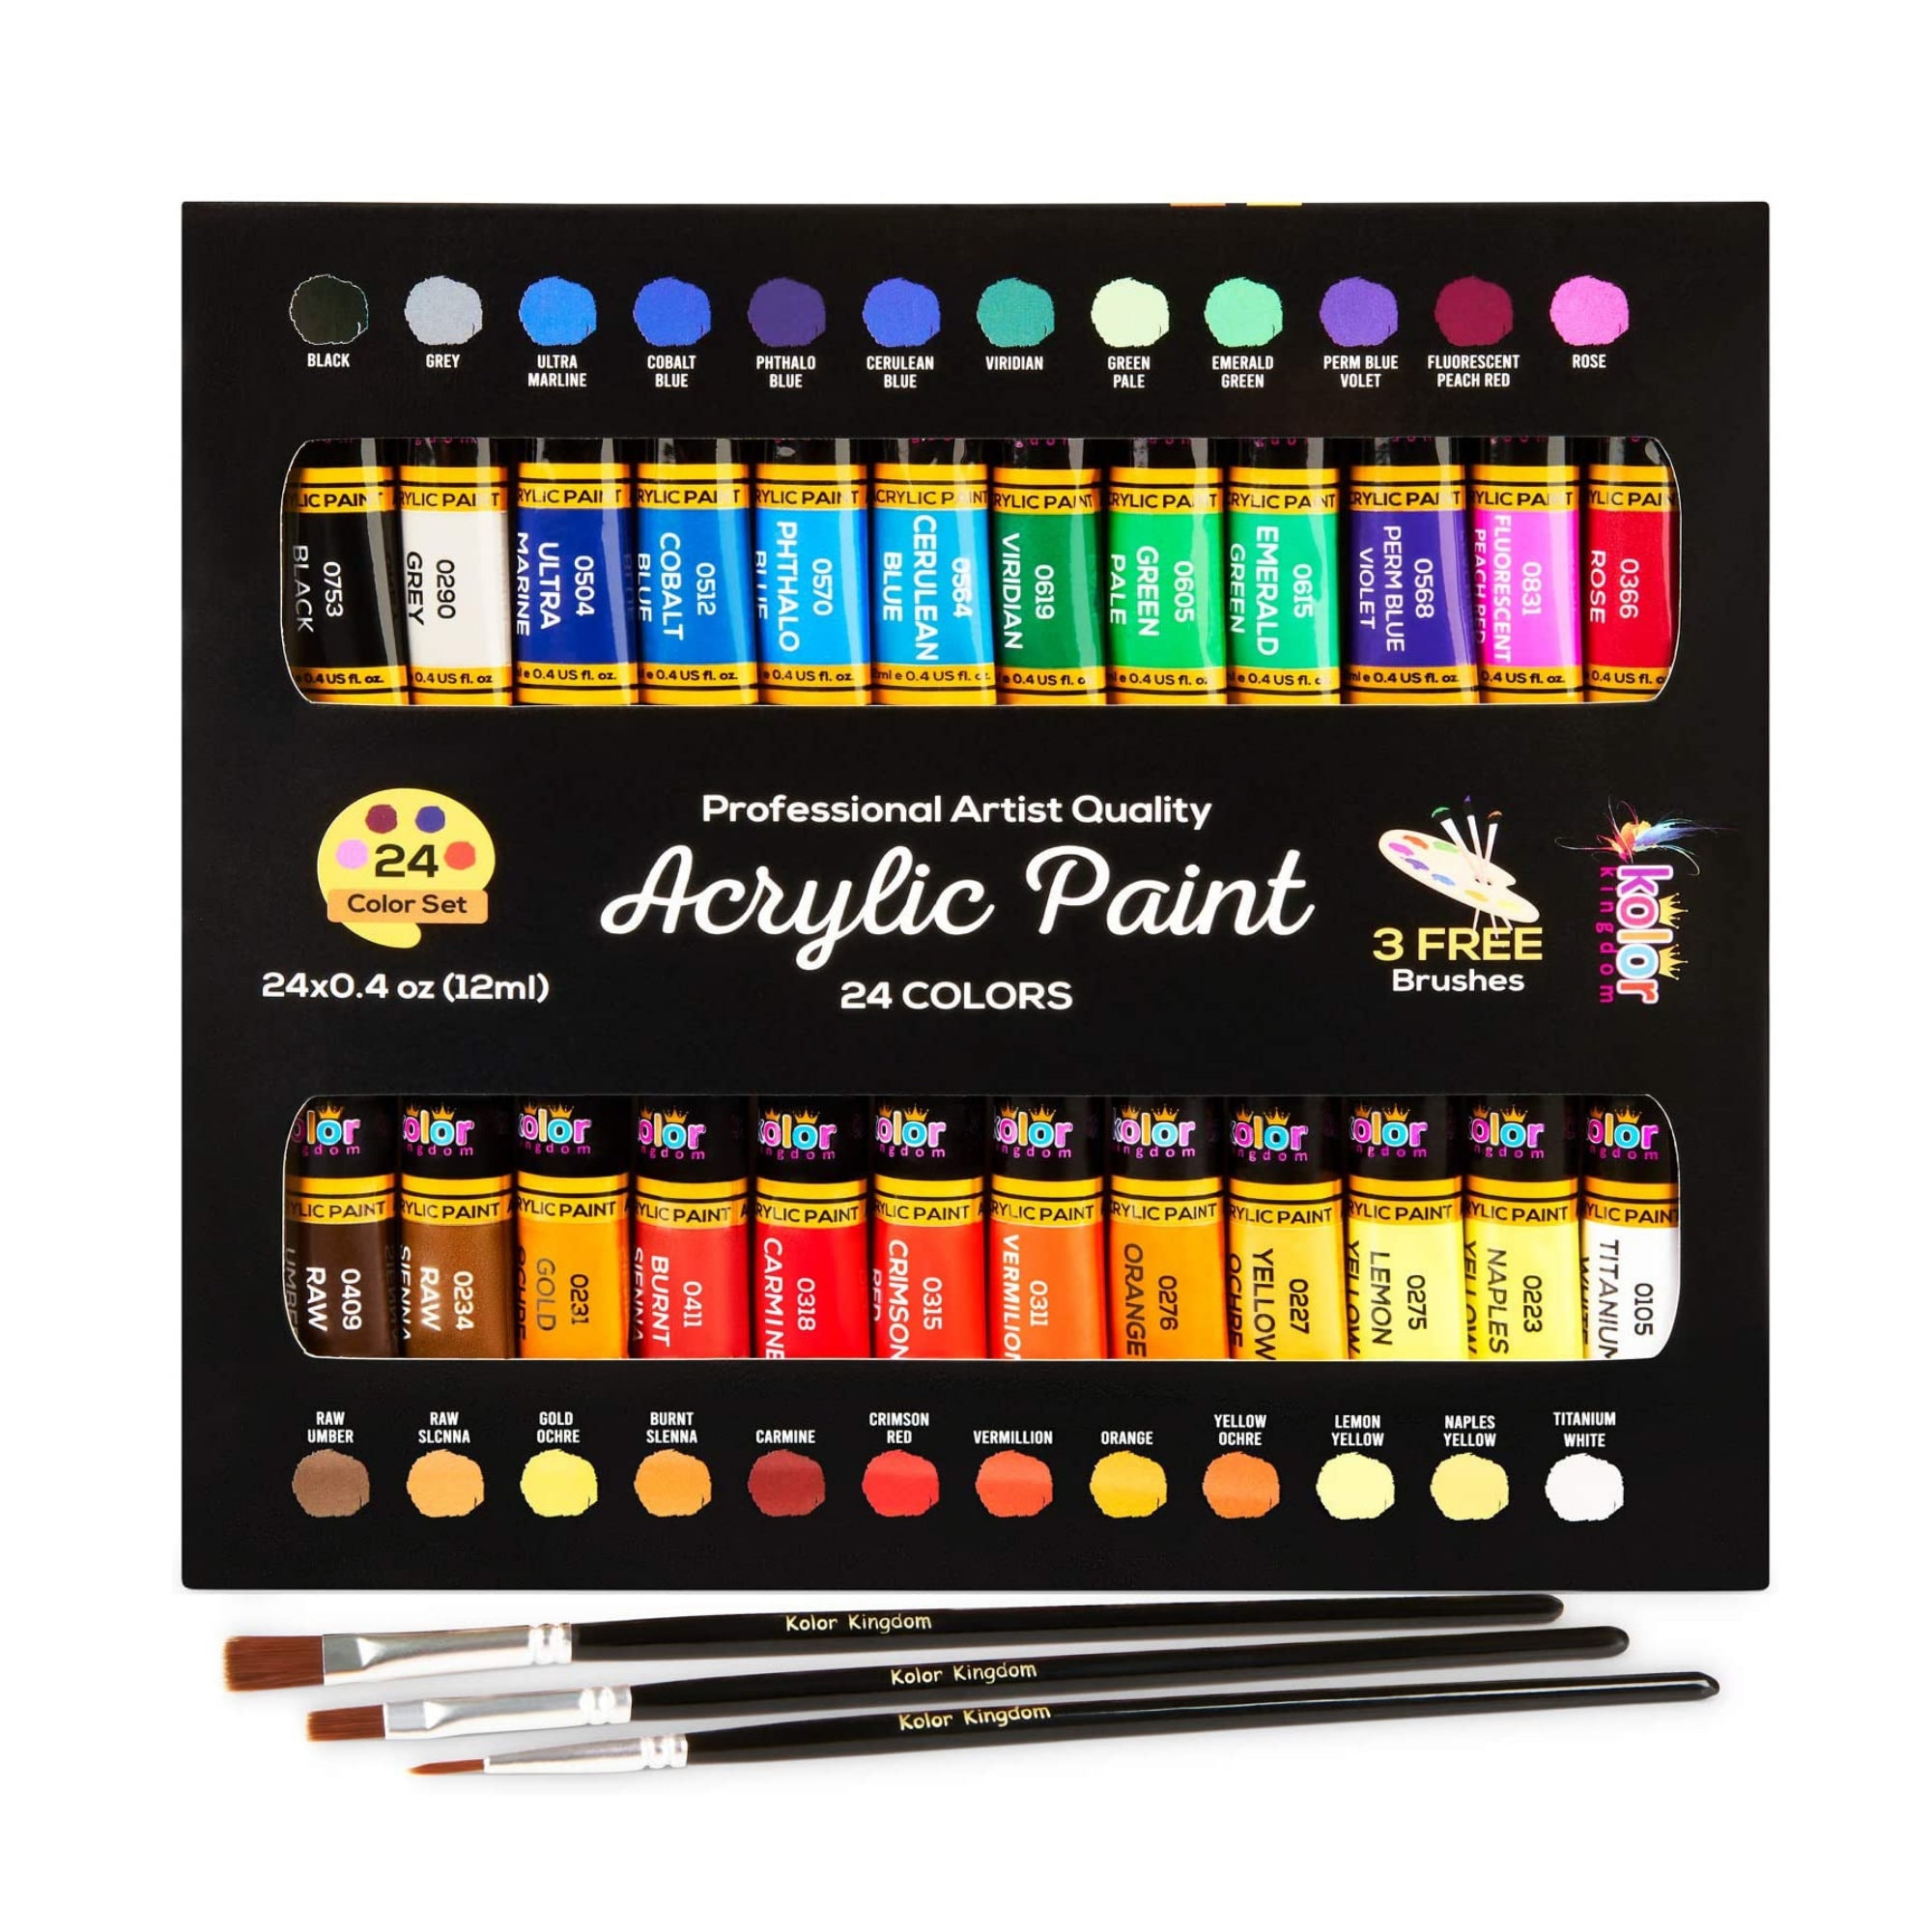 ACRYLIC PAINT SET 10 X 12ml Tubes by Work of Art, Brand New 